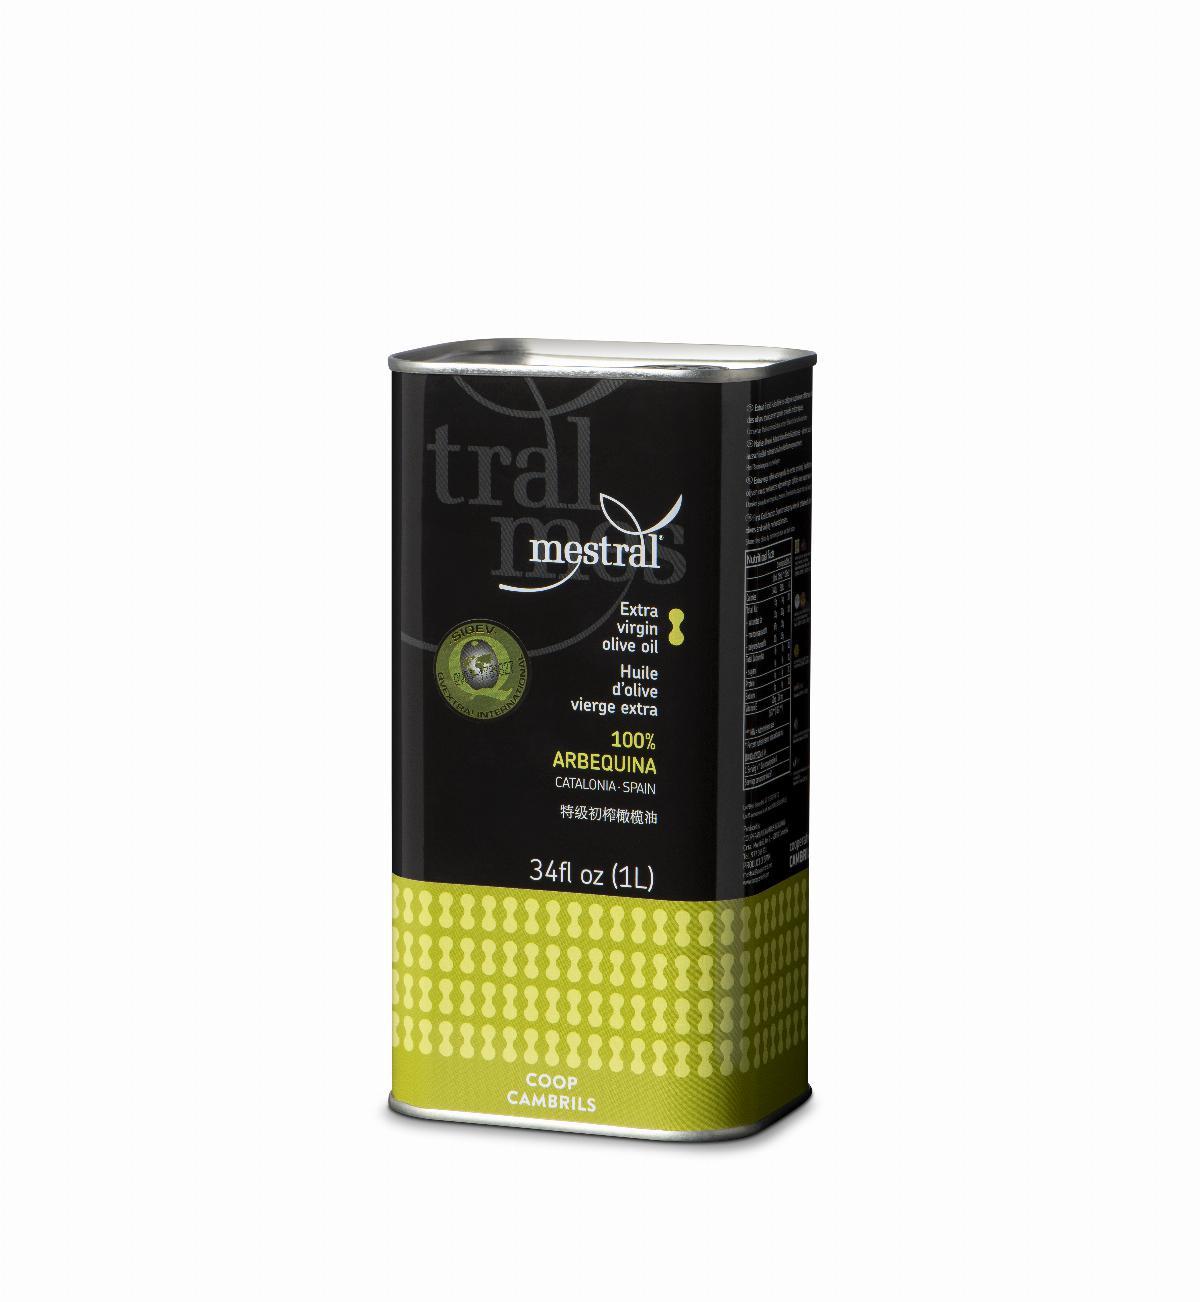 Huile d'olive et Condiments - Huile d'Olive Vierge Extra Mestral Boite 1L 100% Arbequina - Mestral Cambrils